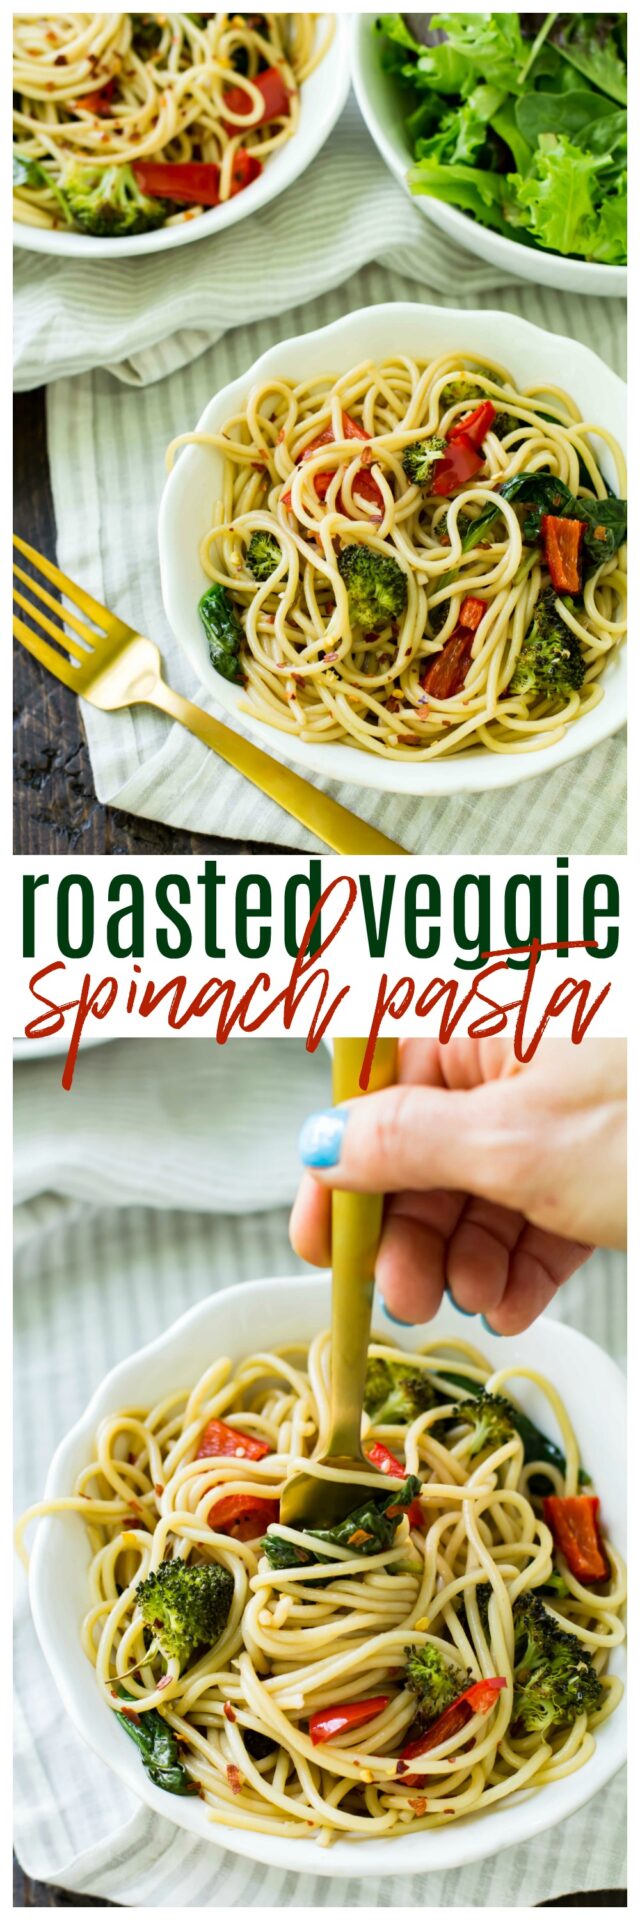 This Roasted Veggie Spinach Pasta features loads of spinach and roasted vegetables tossed with a light balsamic sauce and served over my favorite Skinner® pasta!